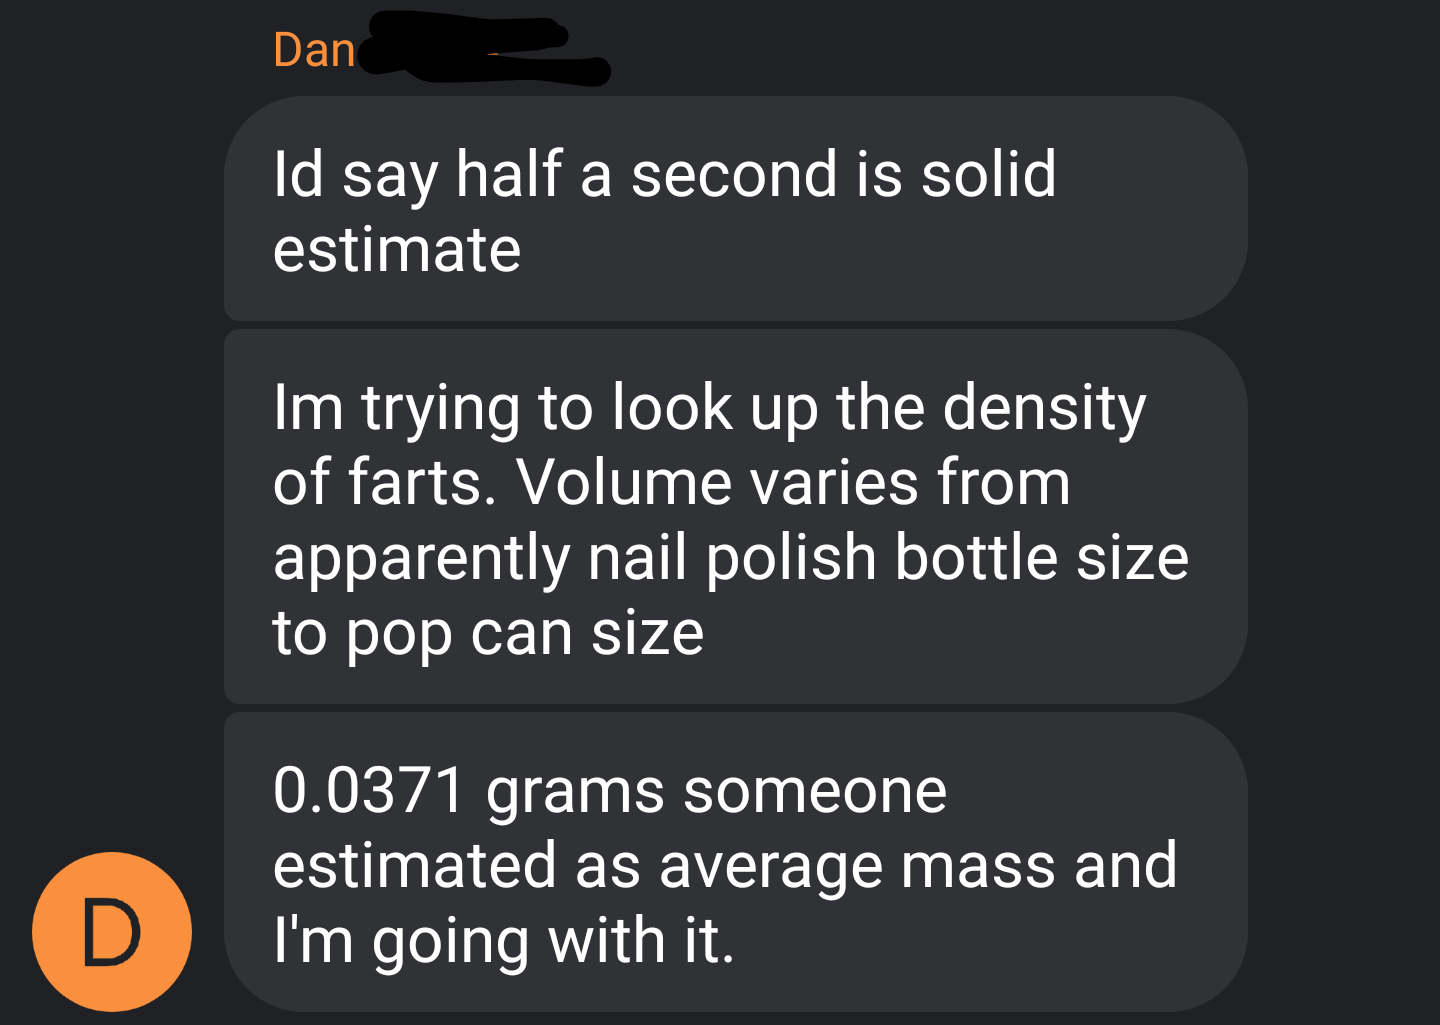 eminem beautiful lyrics - Dan Id say half a second is solid estimate Im trying to look up the density of farts. Volume varies from apparently nail polish bottle size to pop can size 0.0371 grams someone estimated as average mass and I'm going with it.